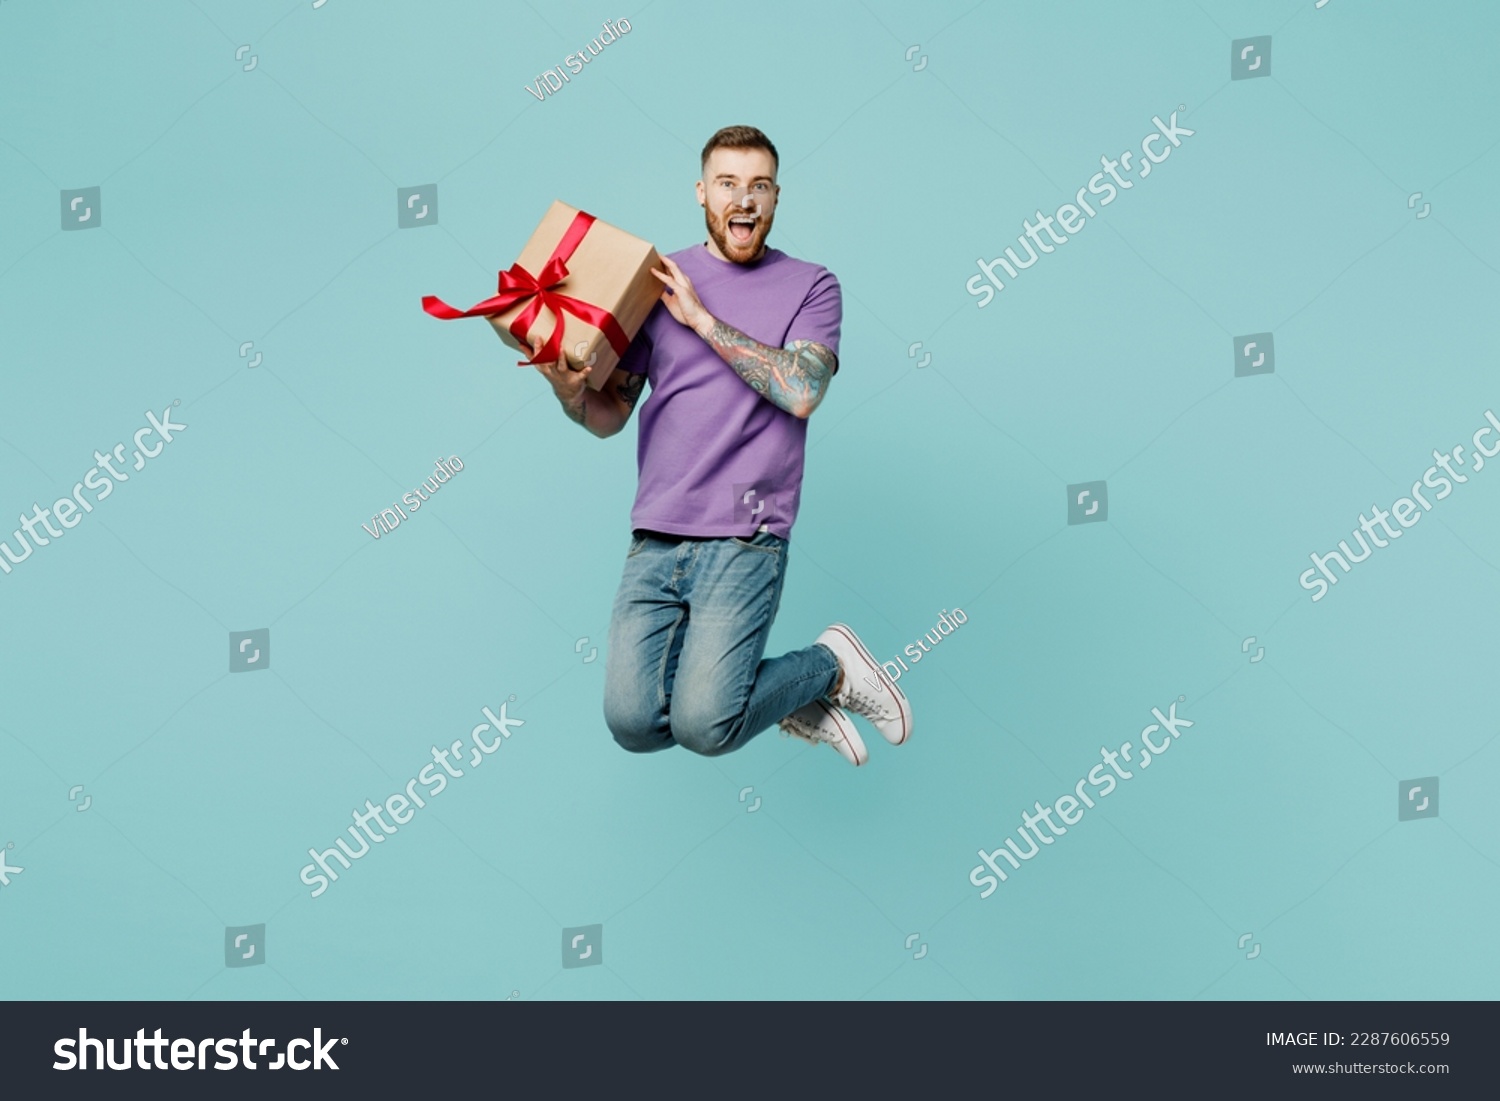 Full body excited fun young man he wears purple t-shirt jump high hold in hand present box with gift ribbon bow isolated on plain pastel light blue cyan background studio portrait. Lifestyle concept #2287606559